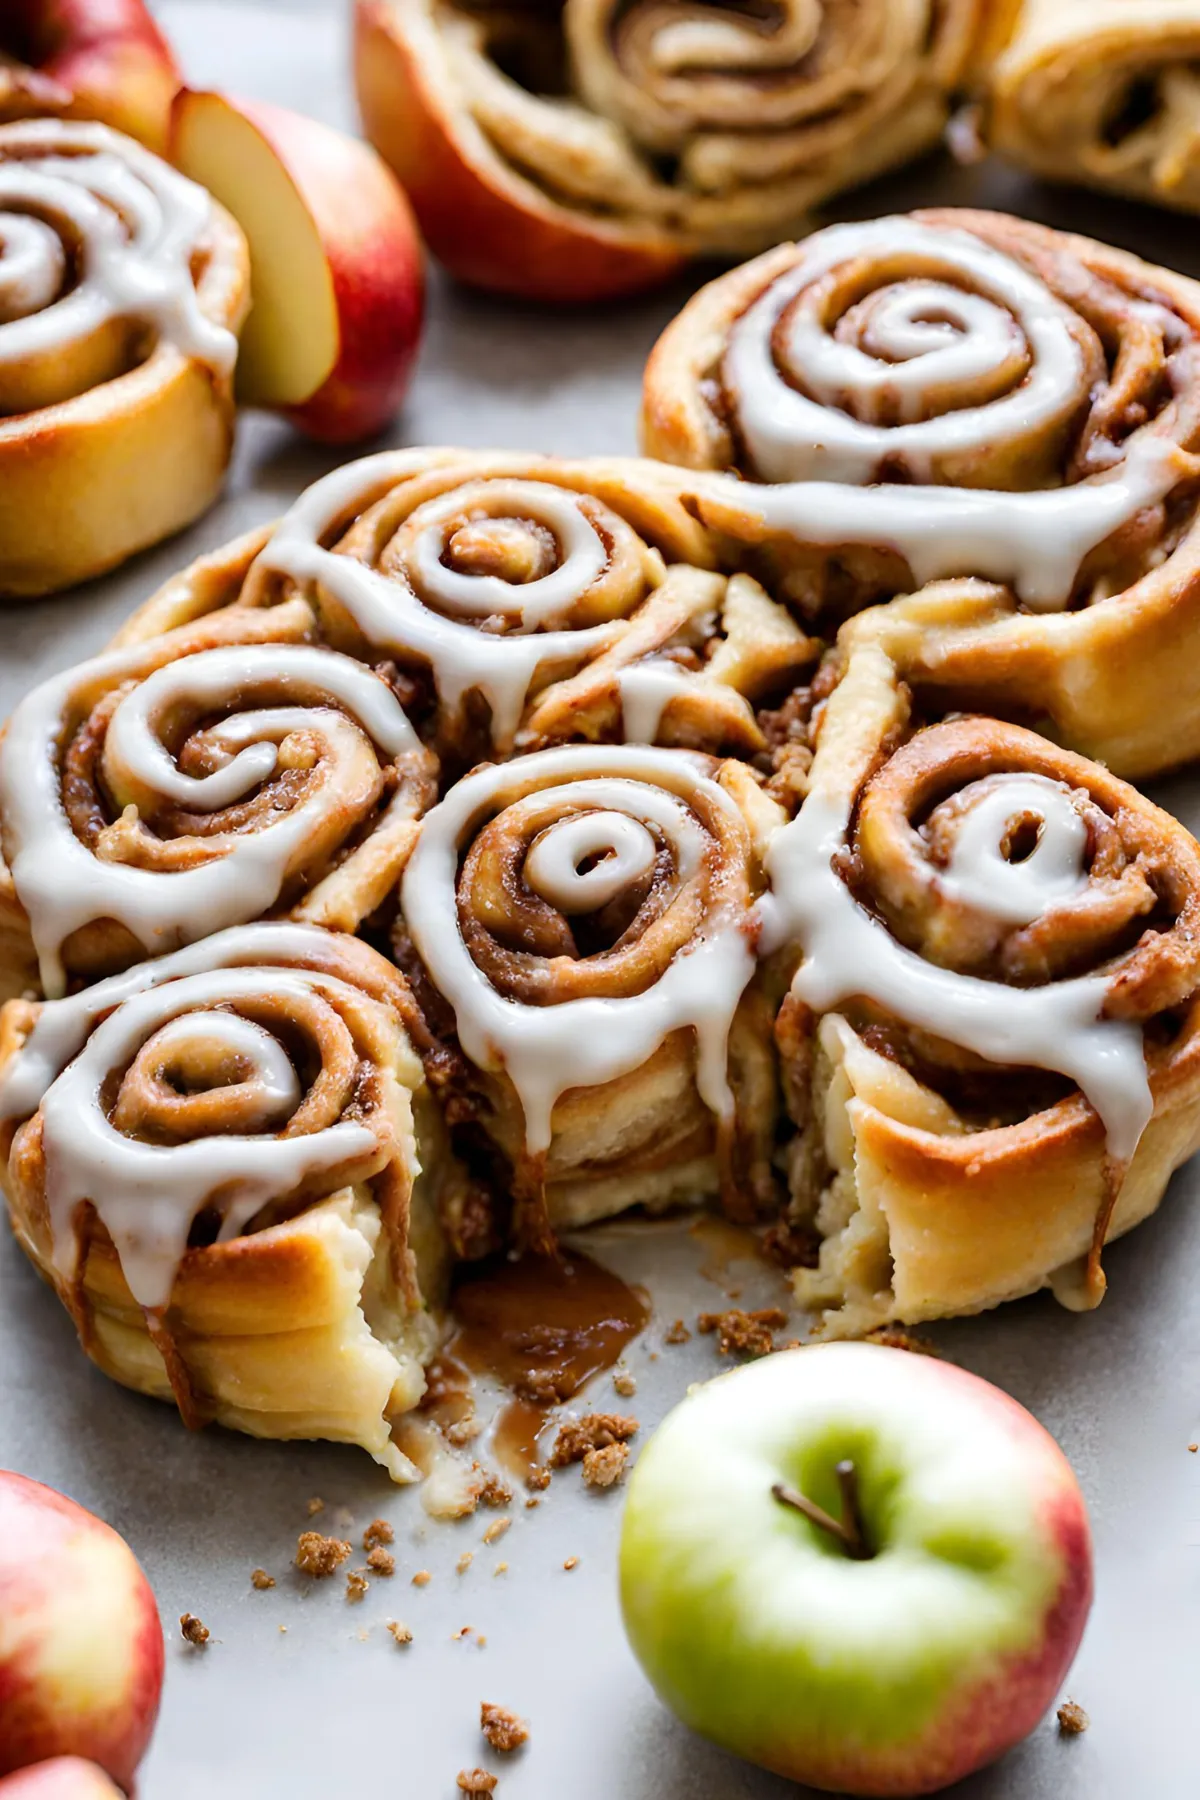 Glazing and Serving Suggestions for Apple Pie Cinnamon Rolls